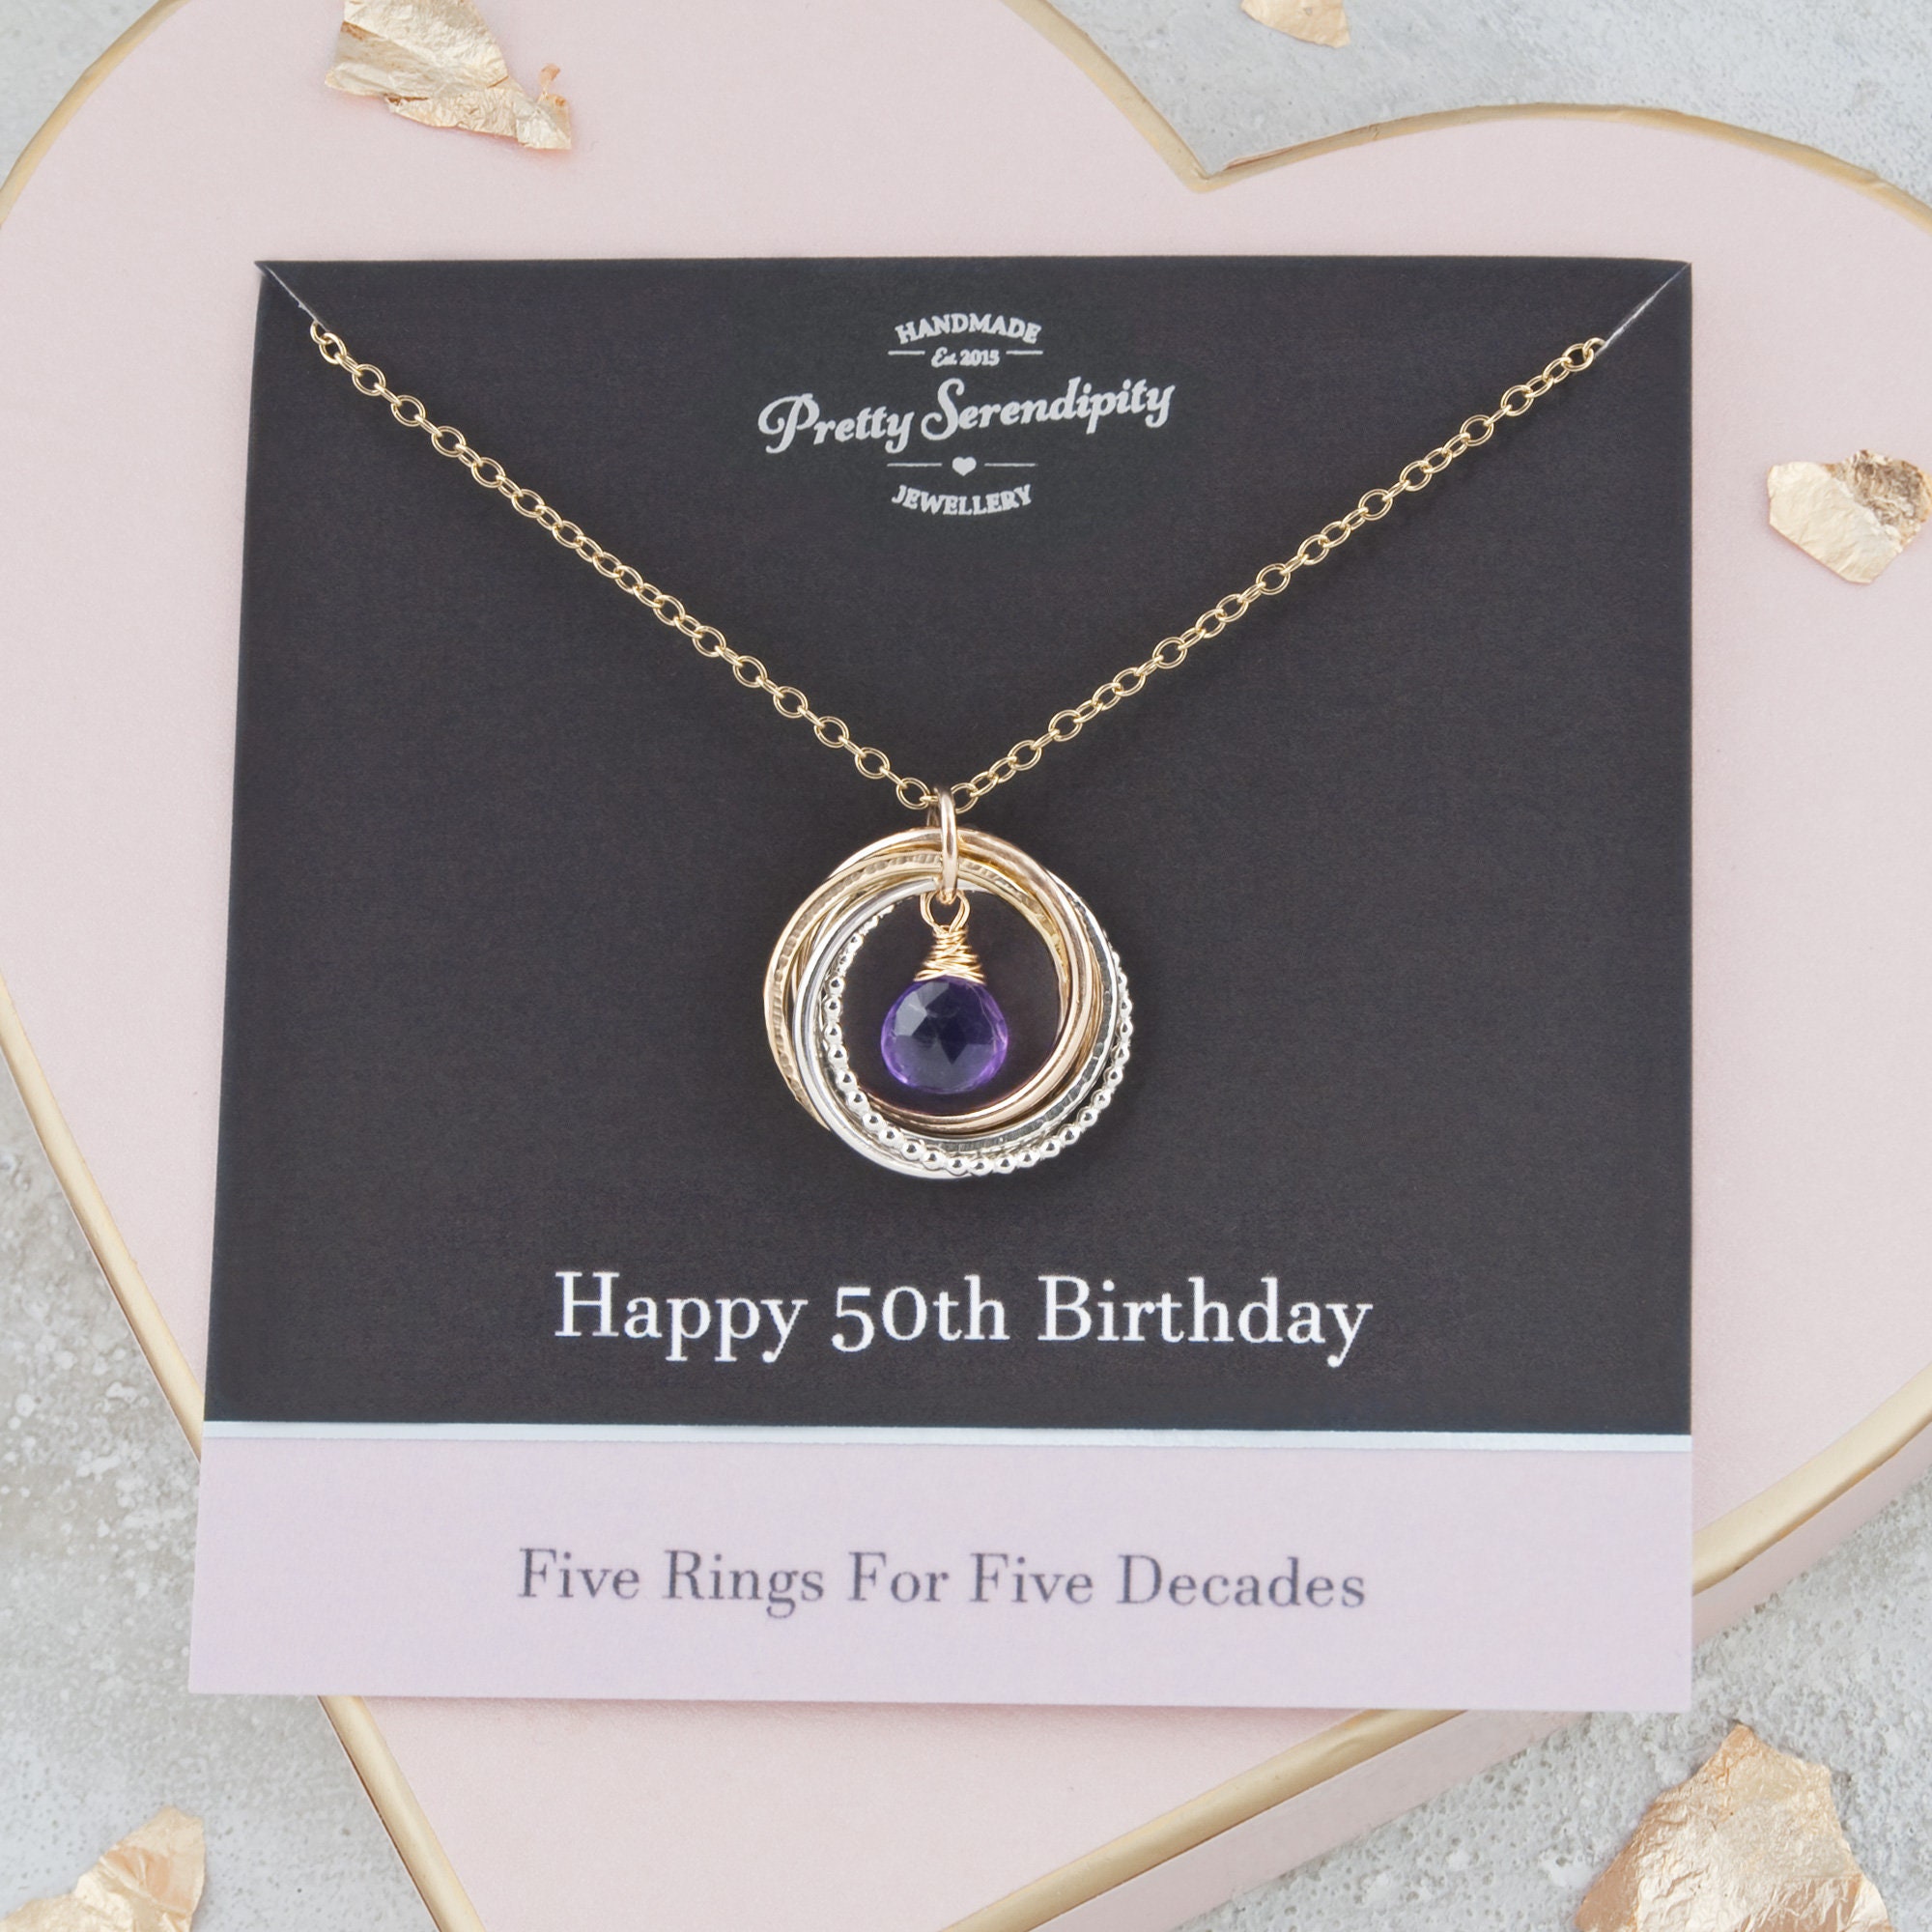 50Th Birthday Mixed Metal Birthstone Necklace - 5 Rings For Decades Gifts Her Silver & 14Ct Gold Fill